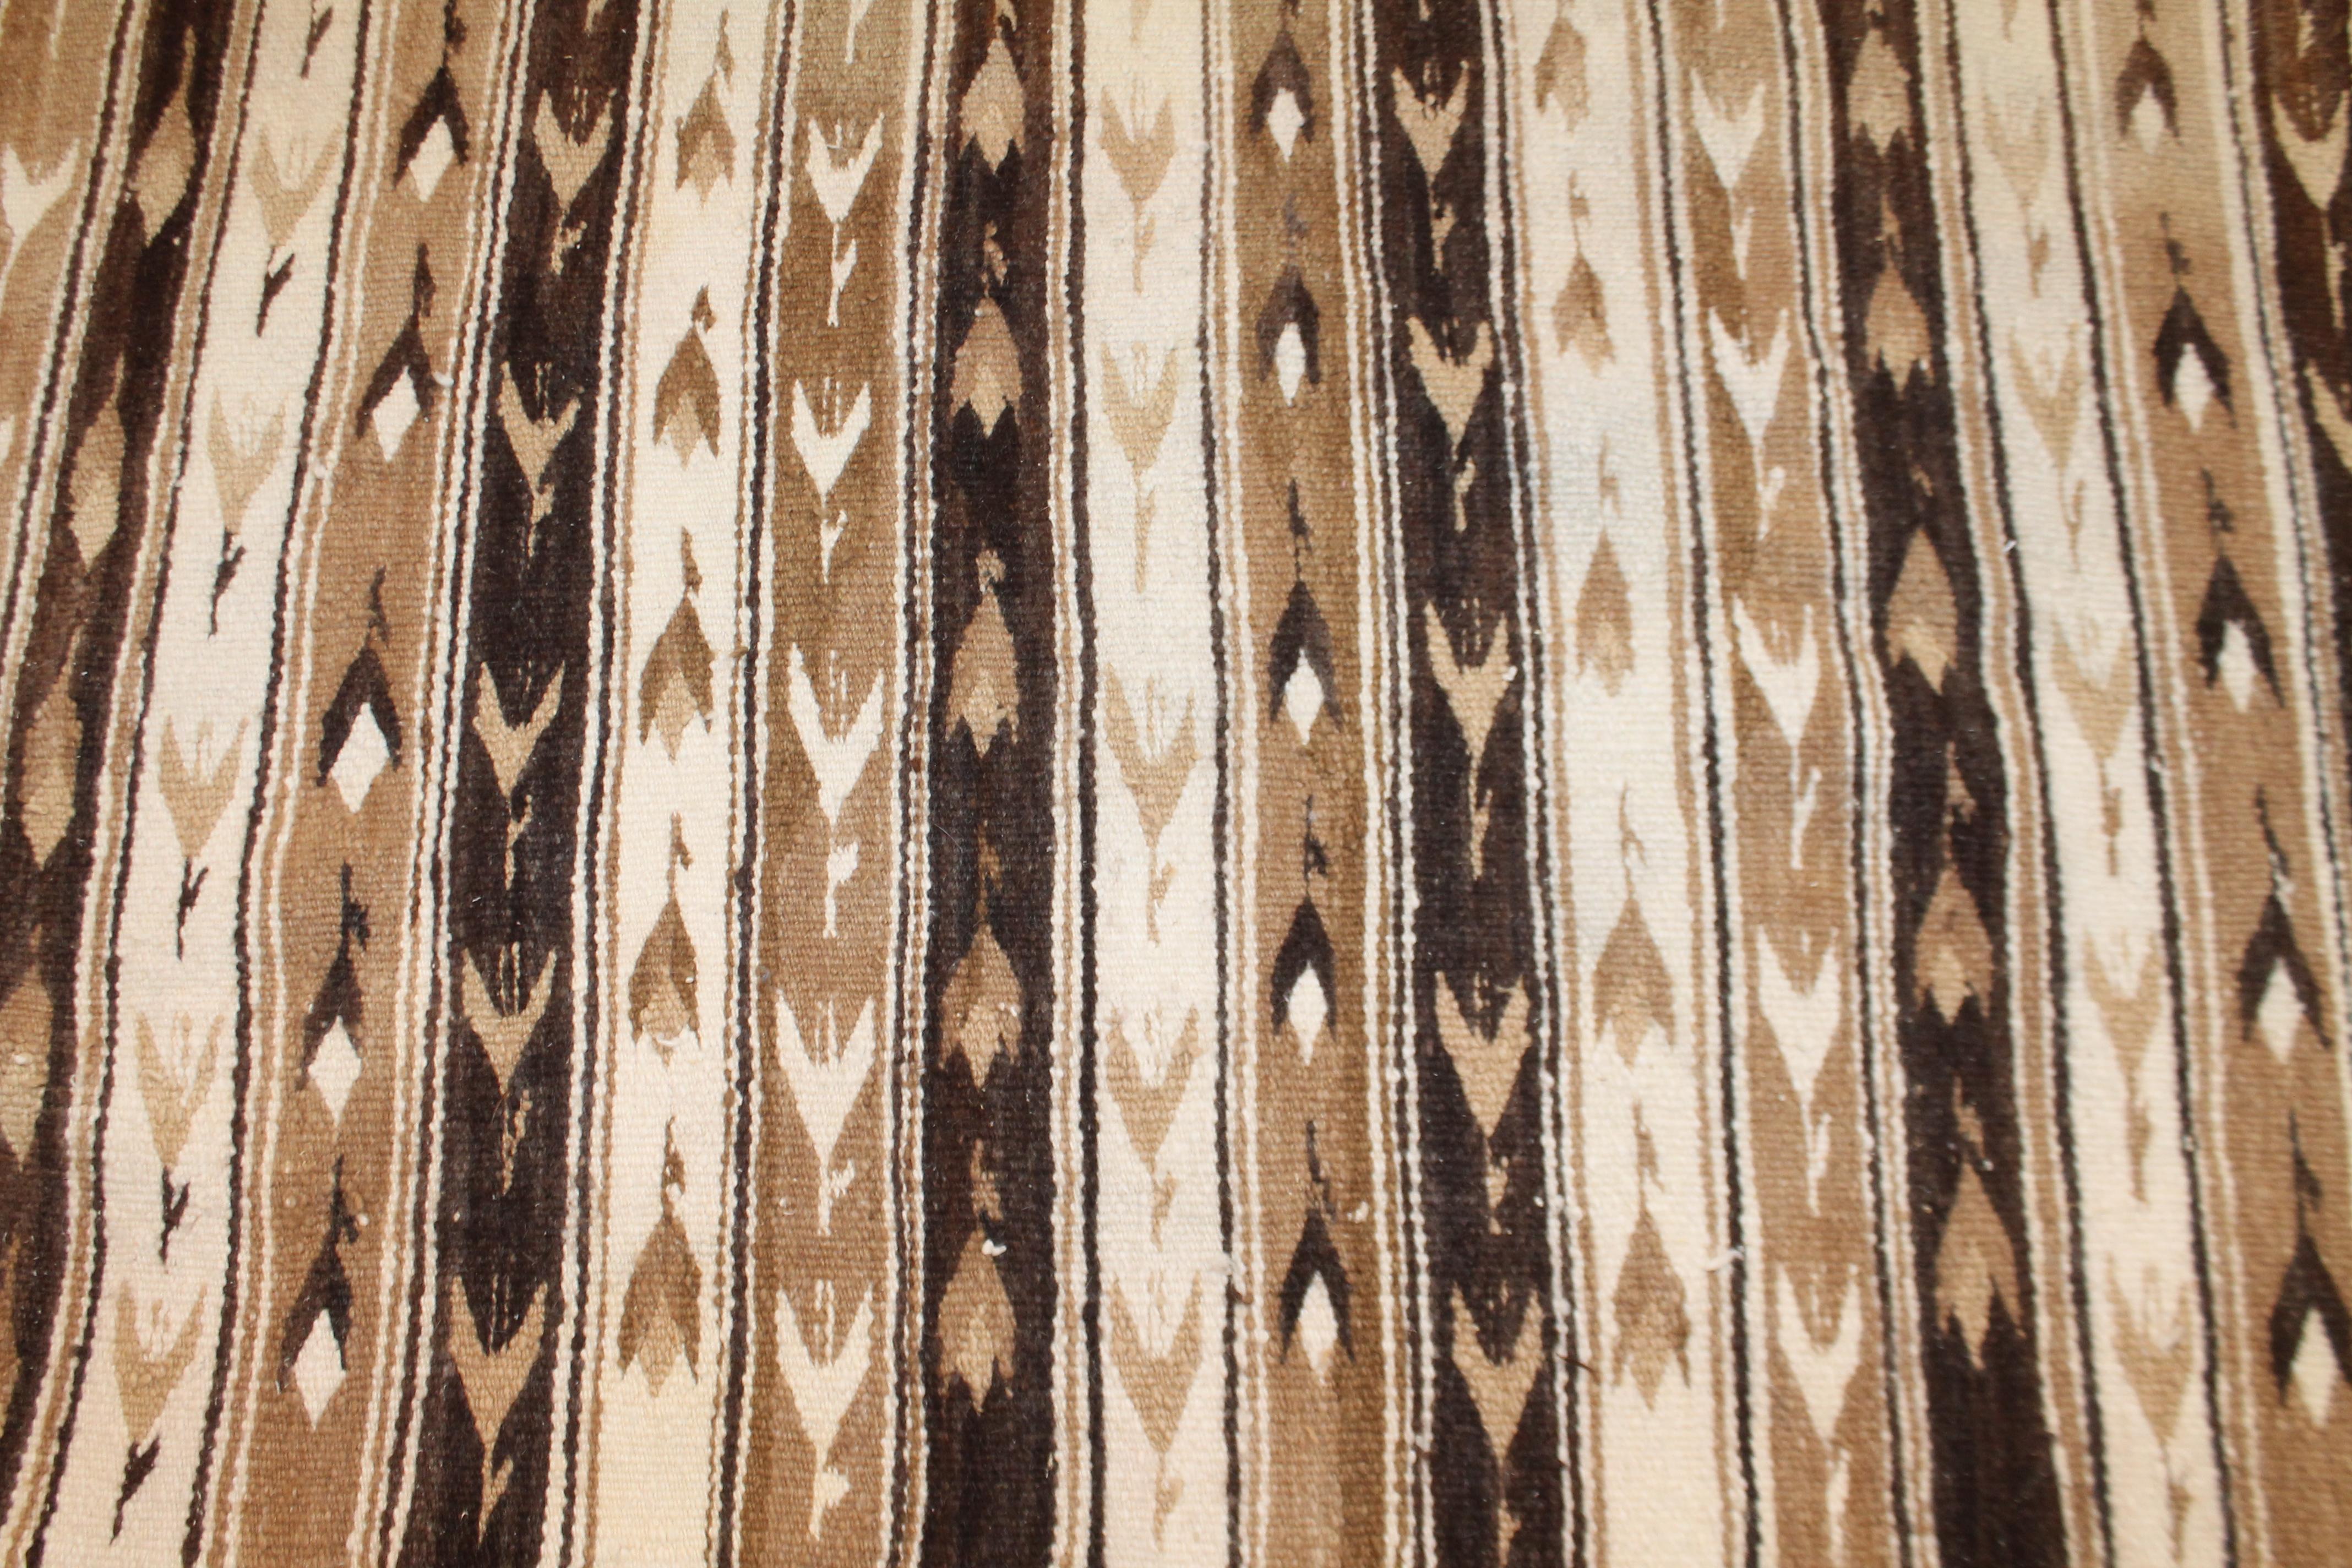 This fine handwoven Peruvian weaving has the original fringe and is in fine condition.